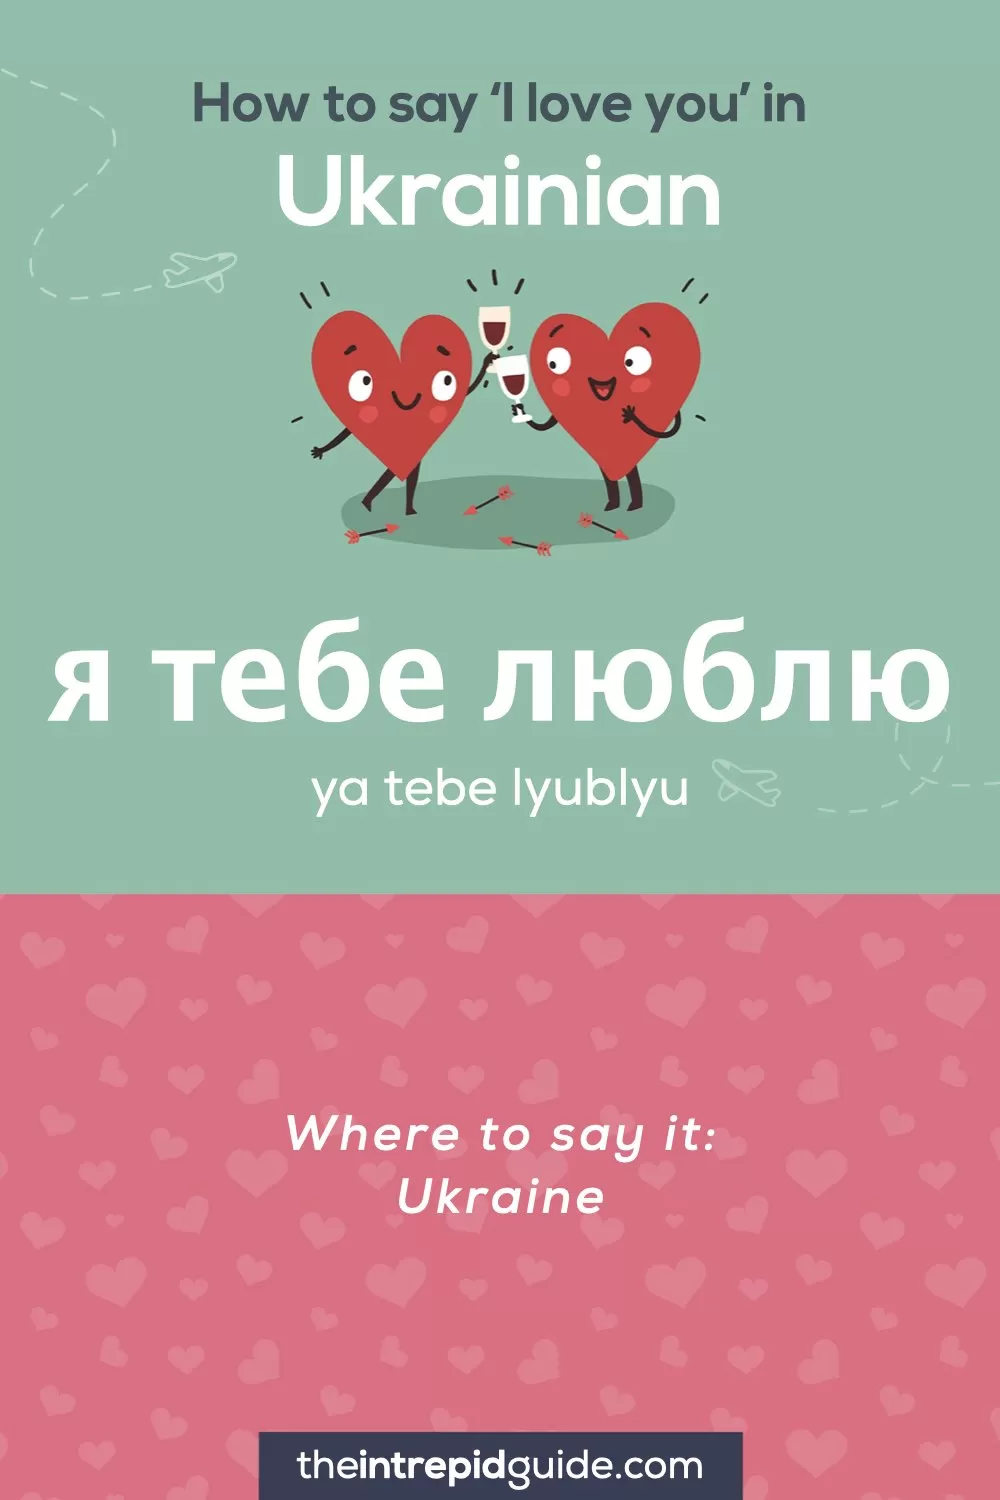 How to say I love you in different languages - Ukrainian - я тебе люблю